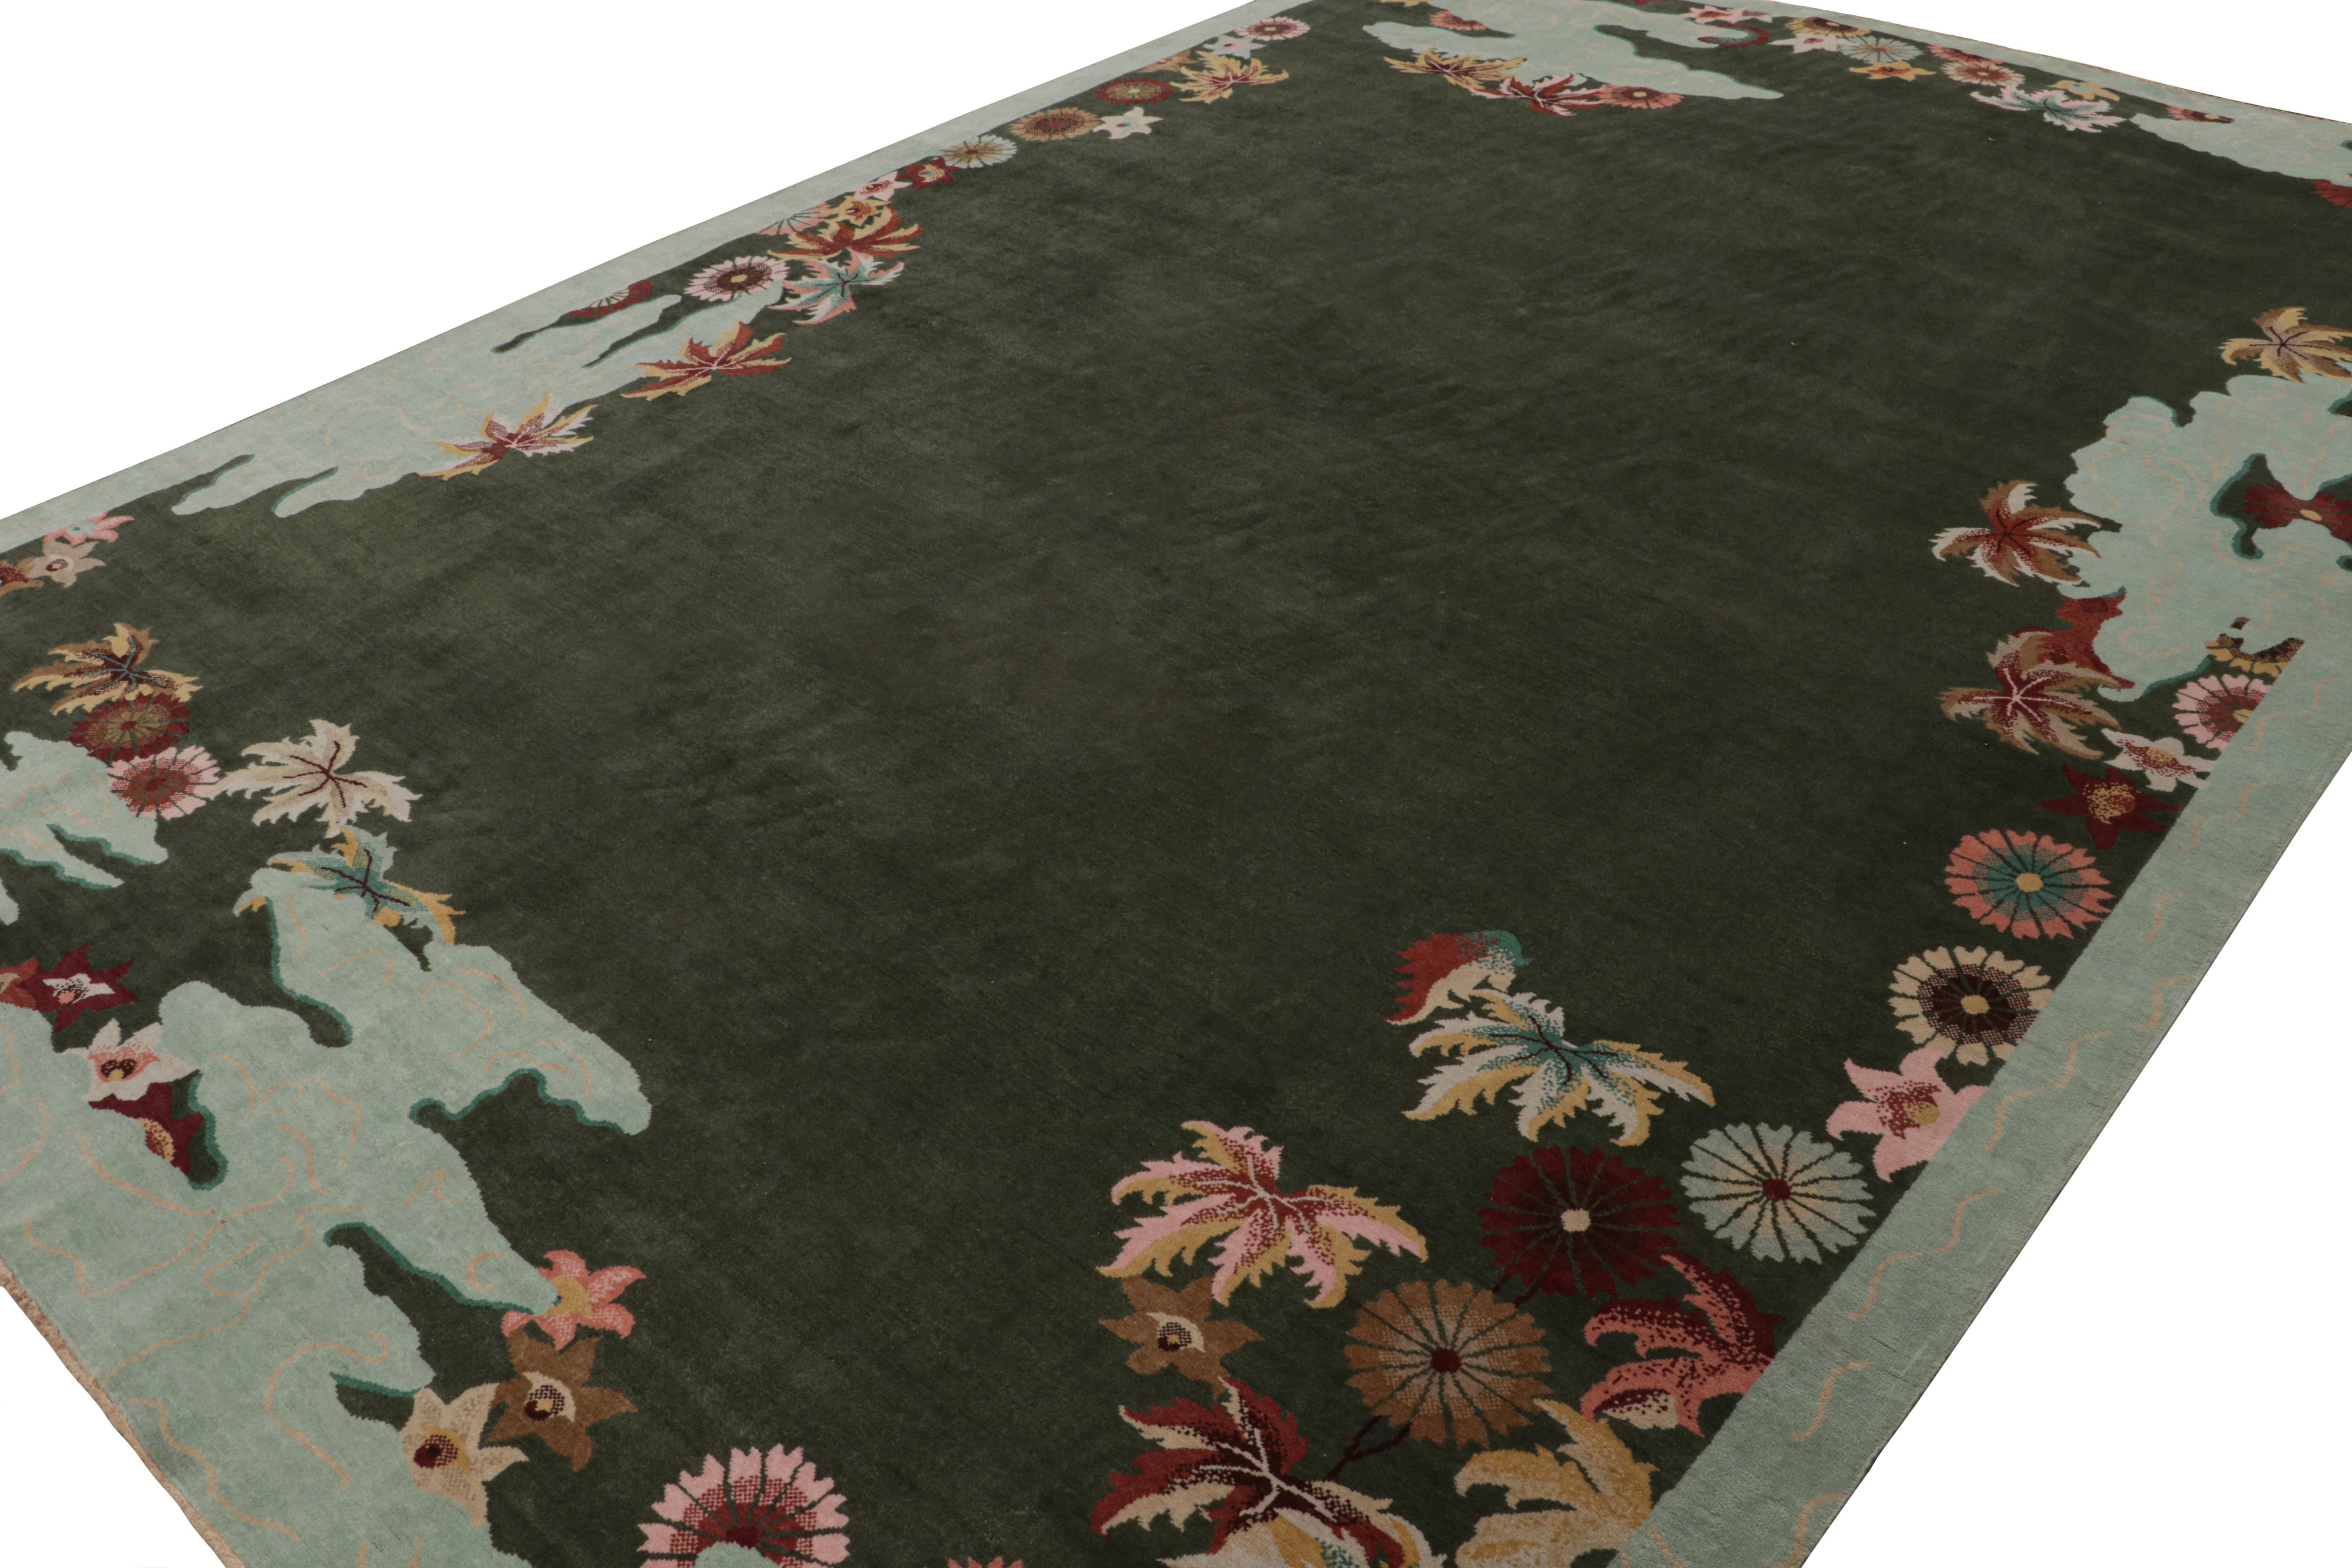 Hand knotted in wool, an 11x16 Chinese art deco style rug inspired by rare period pieces of the 1920s Nichols style. 

On the Design: 

The design boasts an eccentric open field from this period. The field & the surrounding floral patterns enjoy a